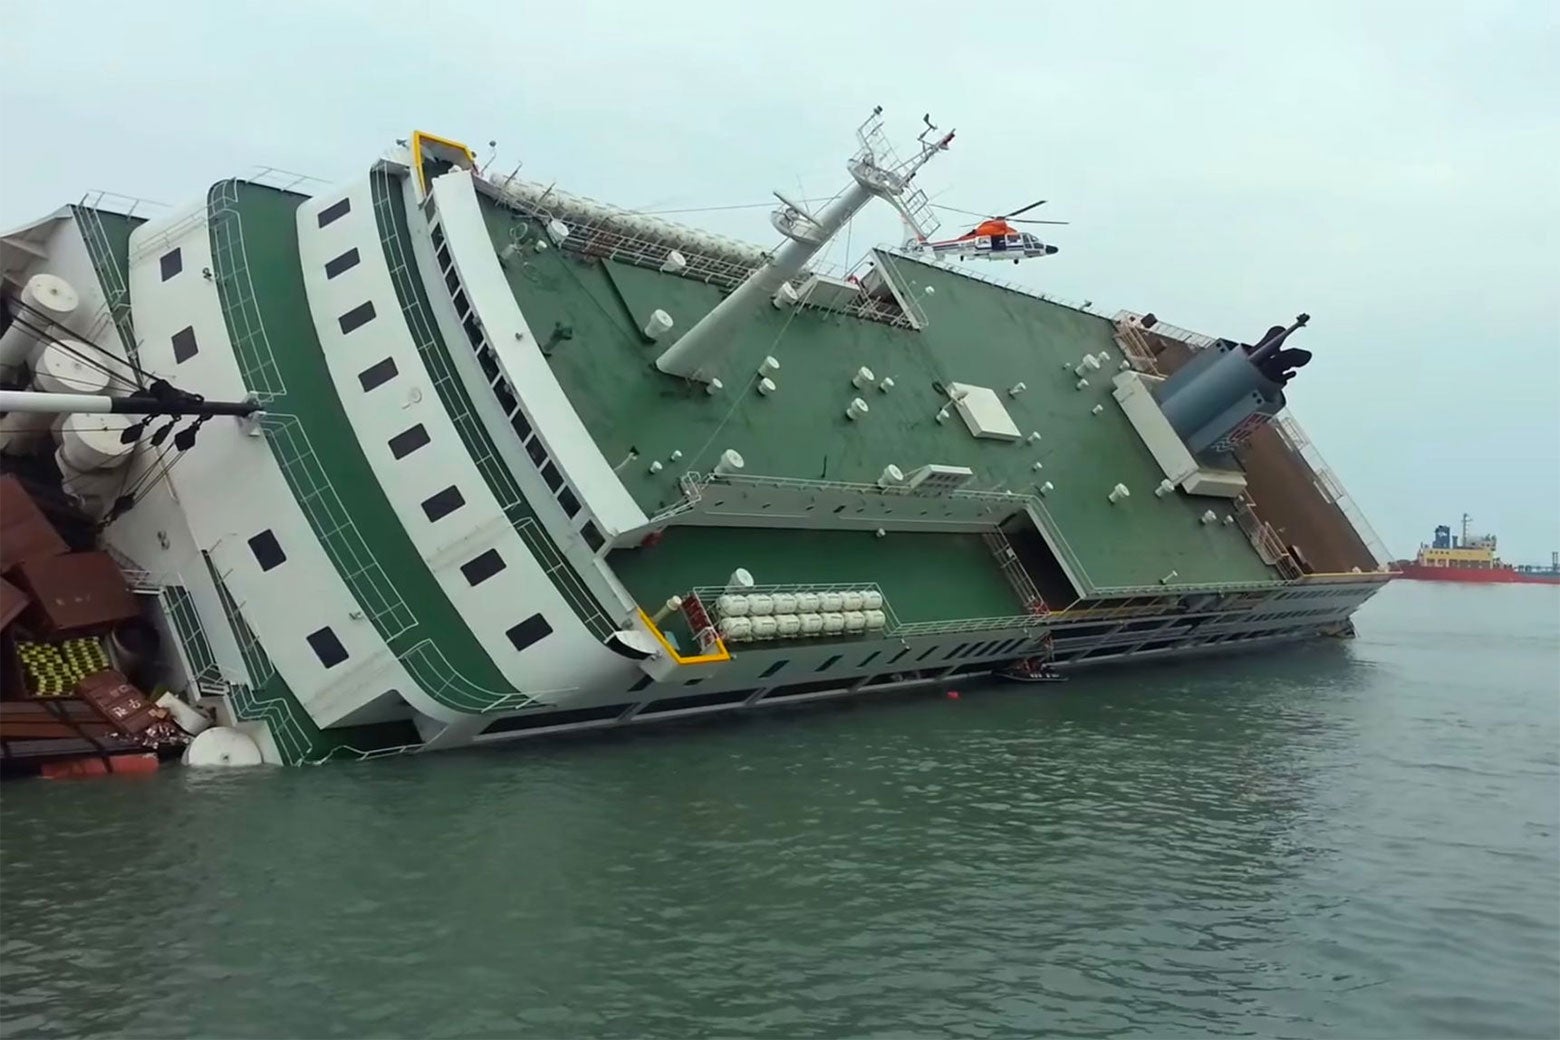 A ship flipped over on its side.